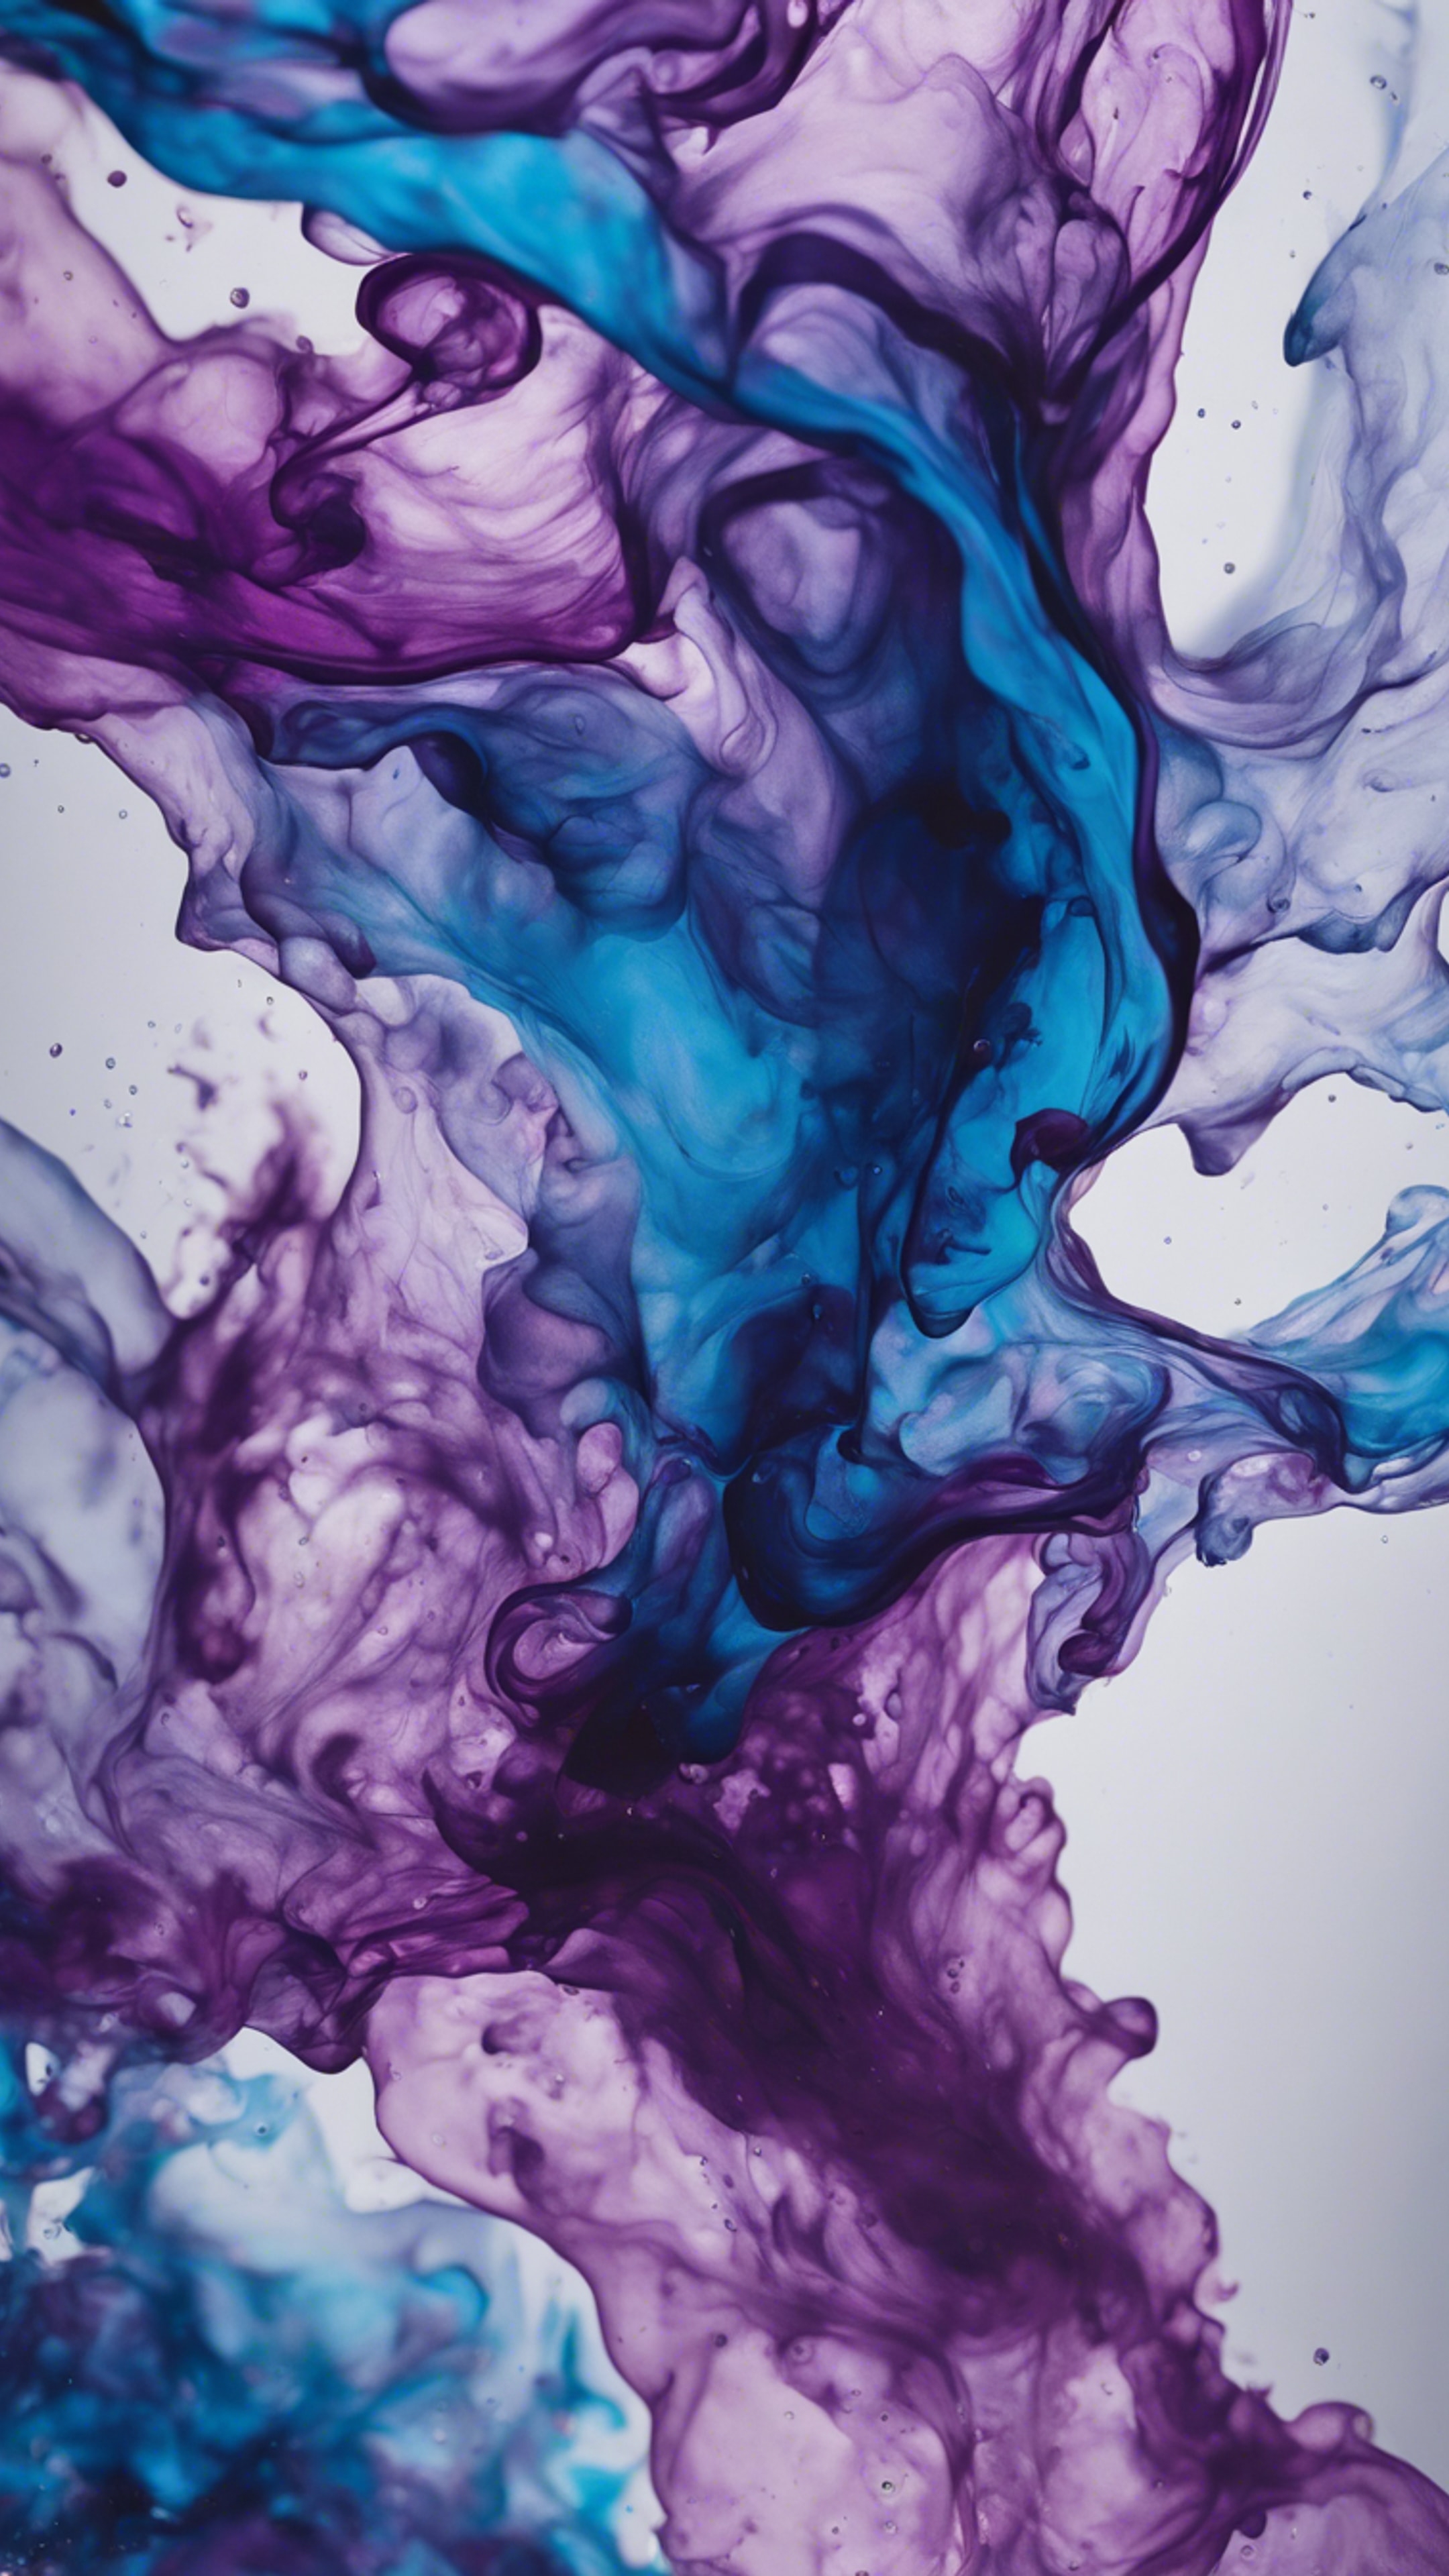 An abstract fluid art piece with swirling waves of ink in hues of cool blue and passionate purple. Tapet[1f0e9ffb93e84991a030]